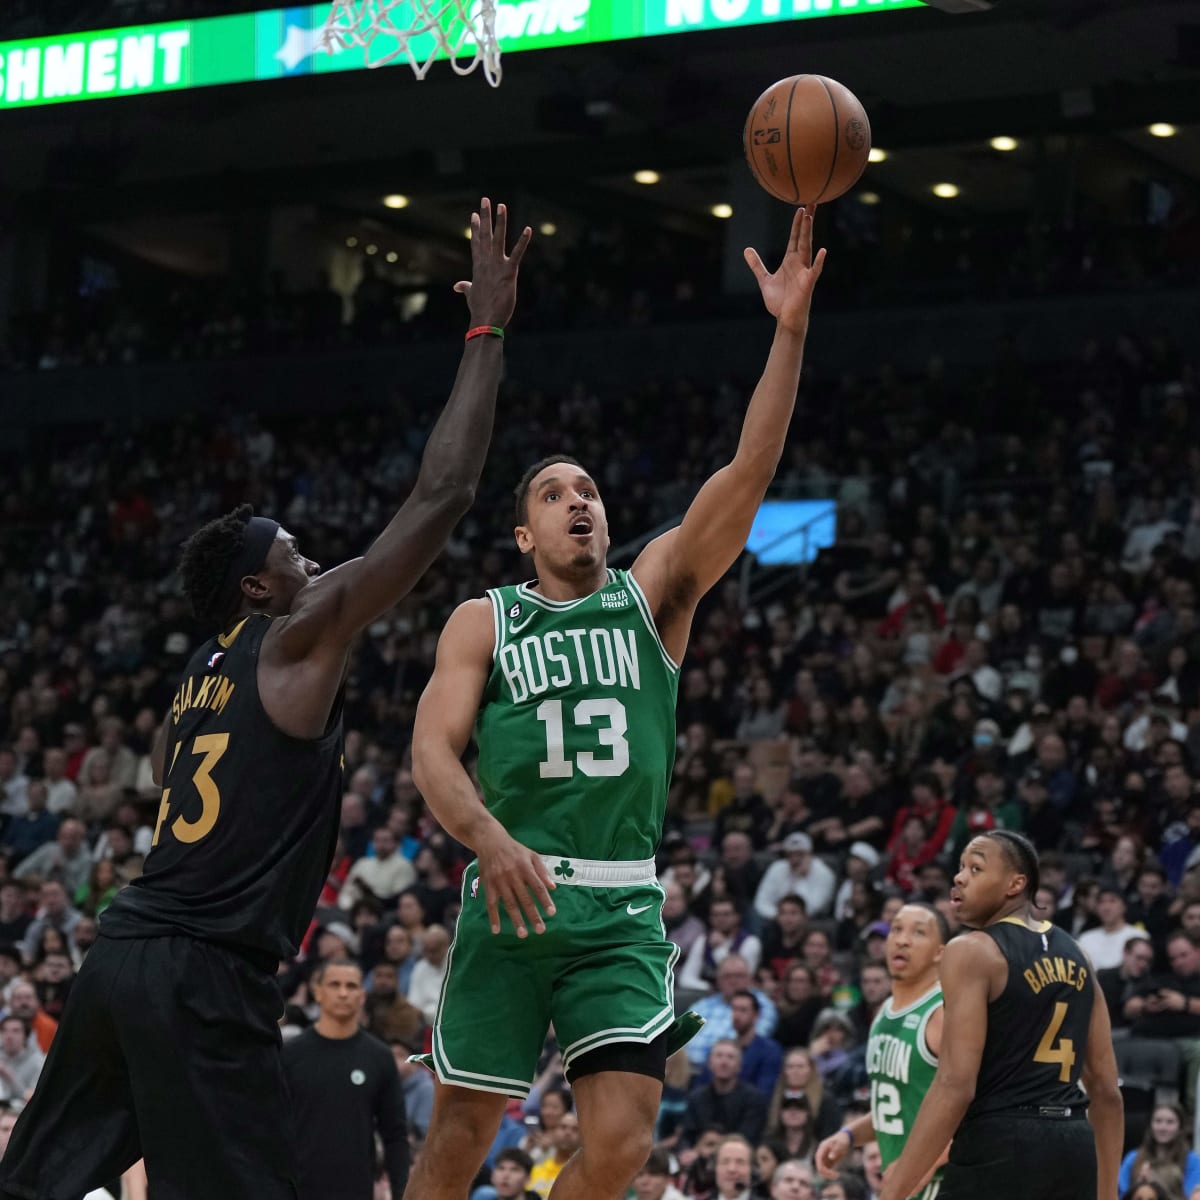 Could Boston's depth at center keep Blake Griffin away?